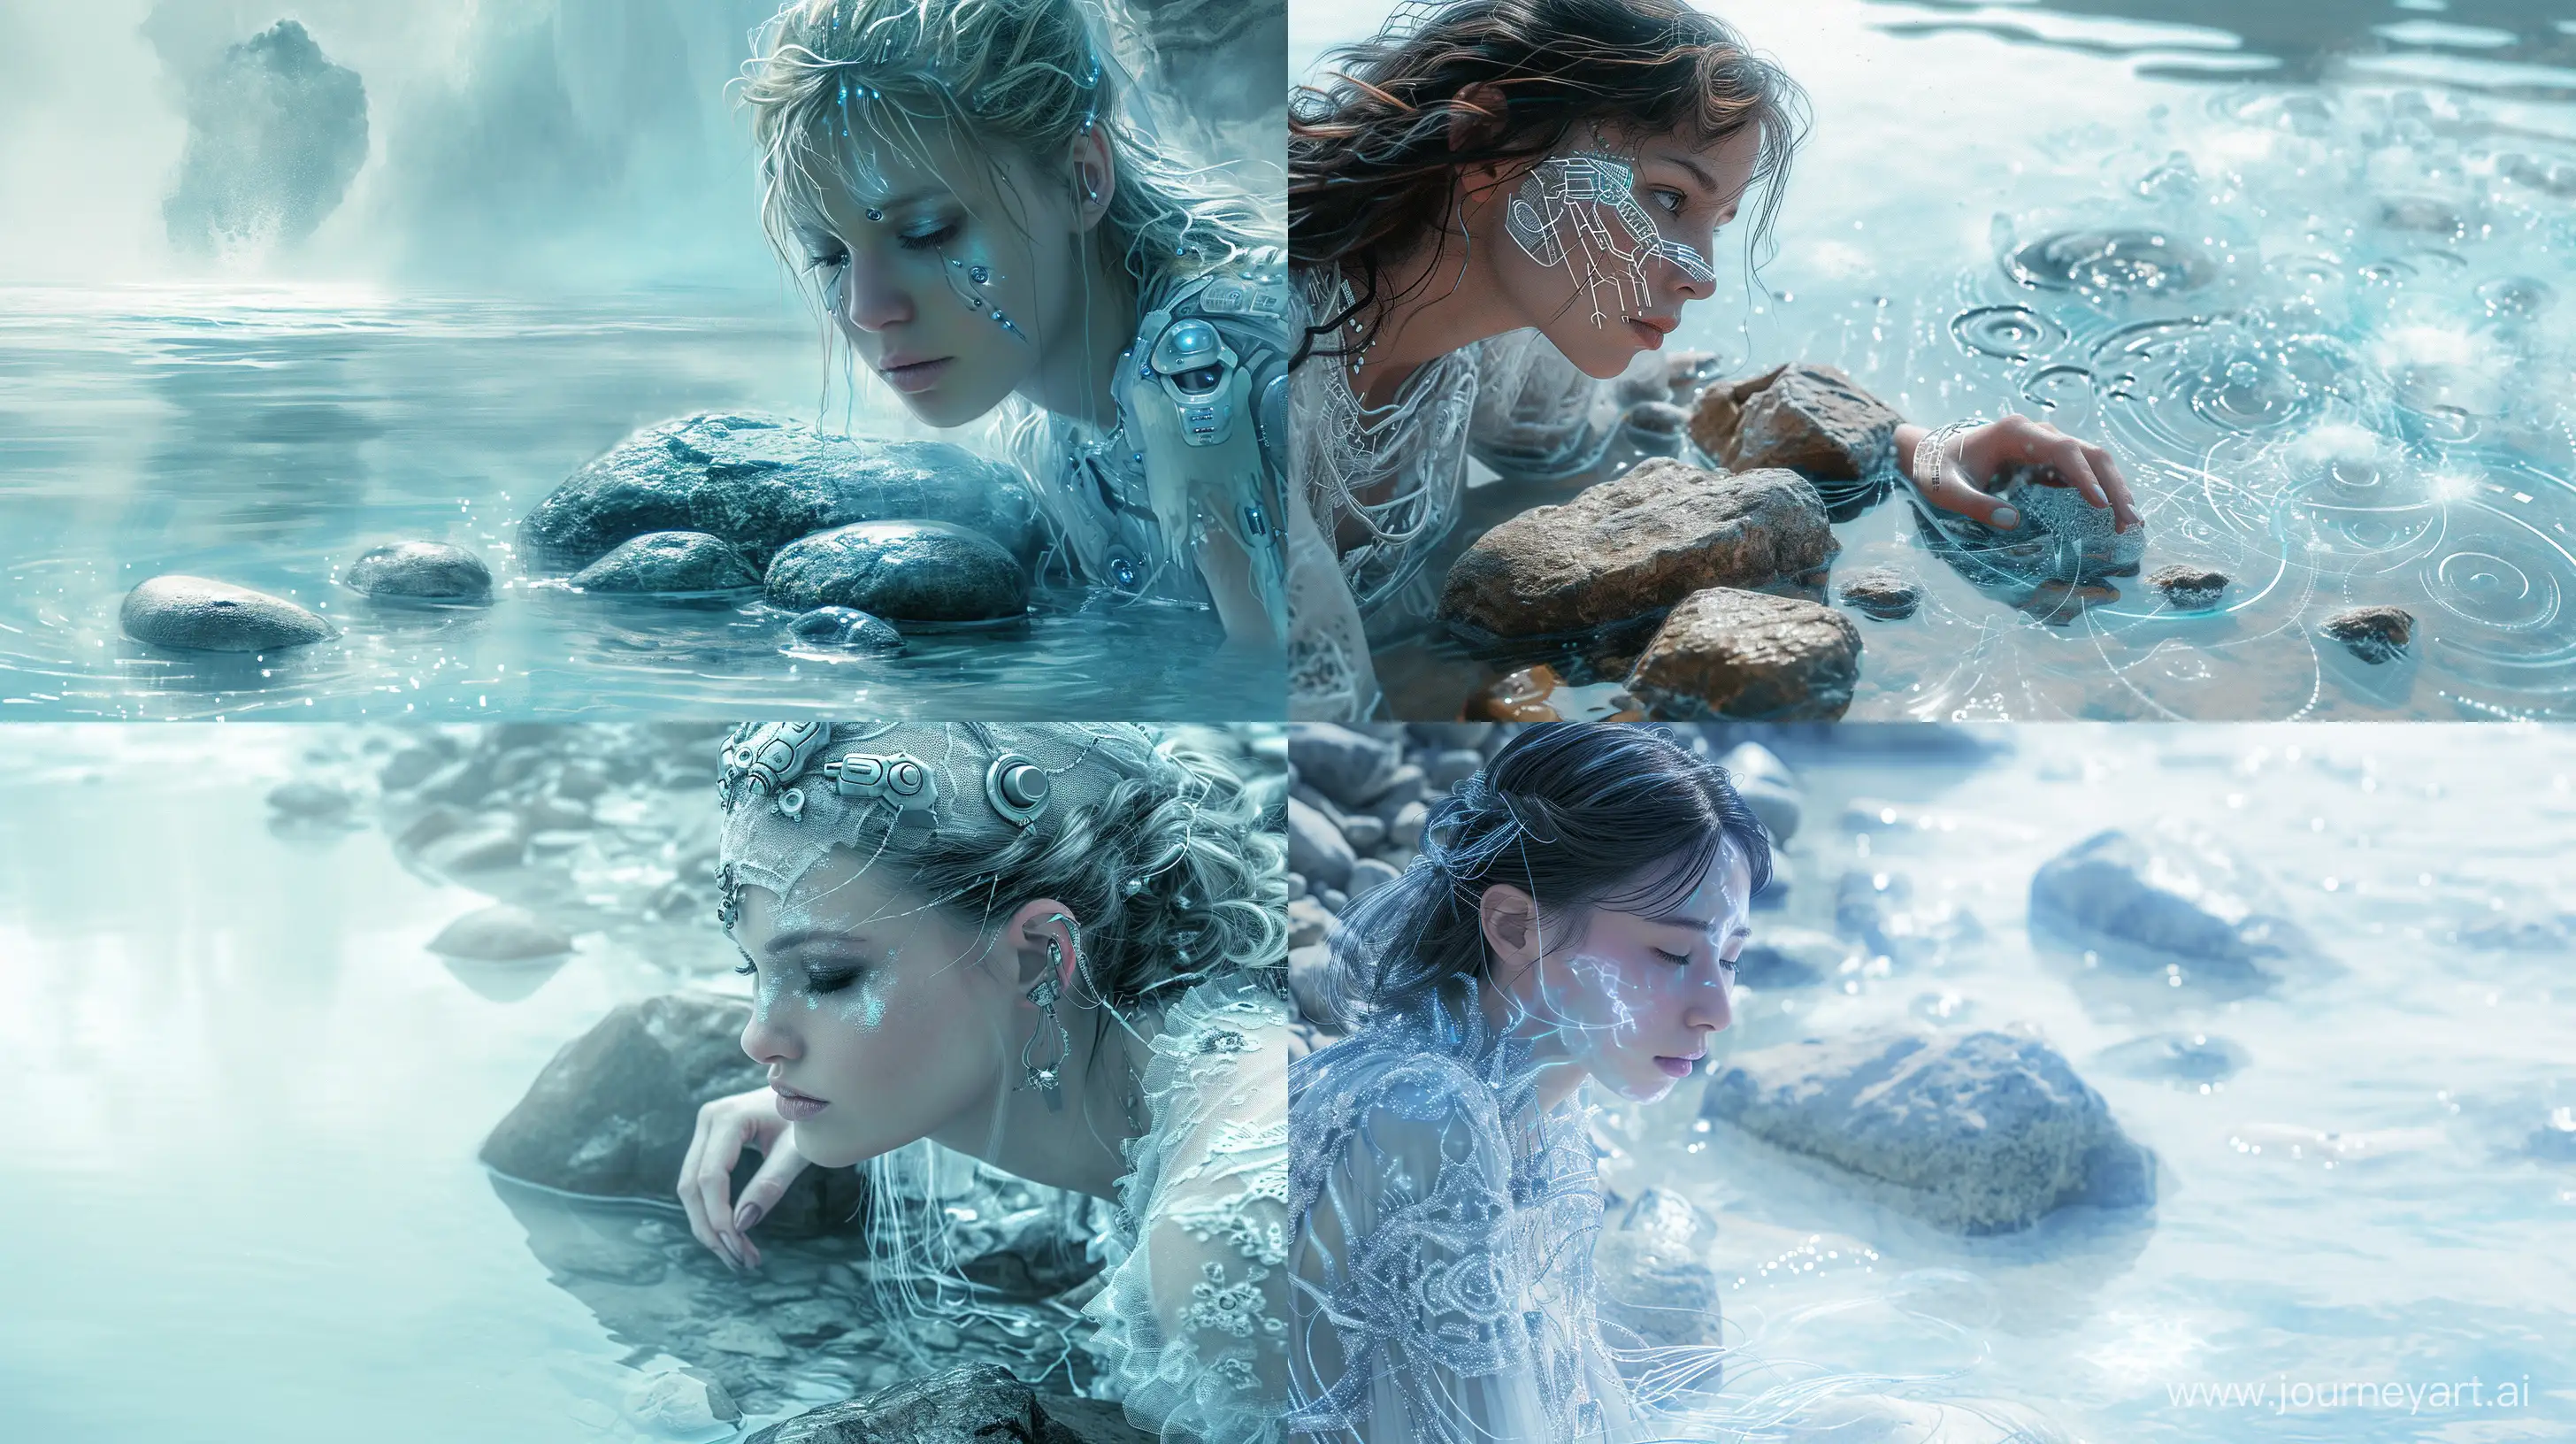 Ethereal-Woman-Amidst-Water-Rocks-Mystical-Silver-and-Blue-Scene-Inspired-by-Frostpunk